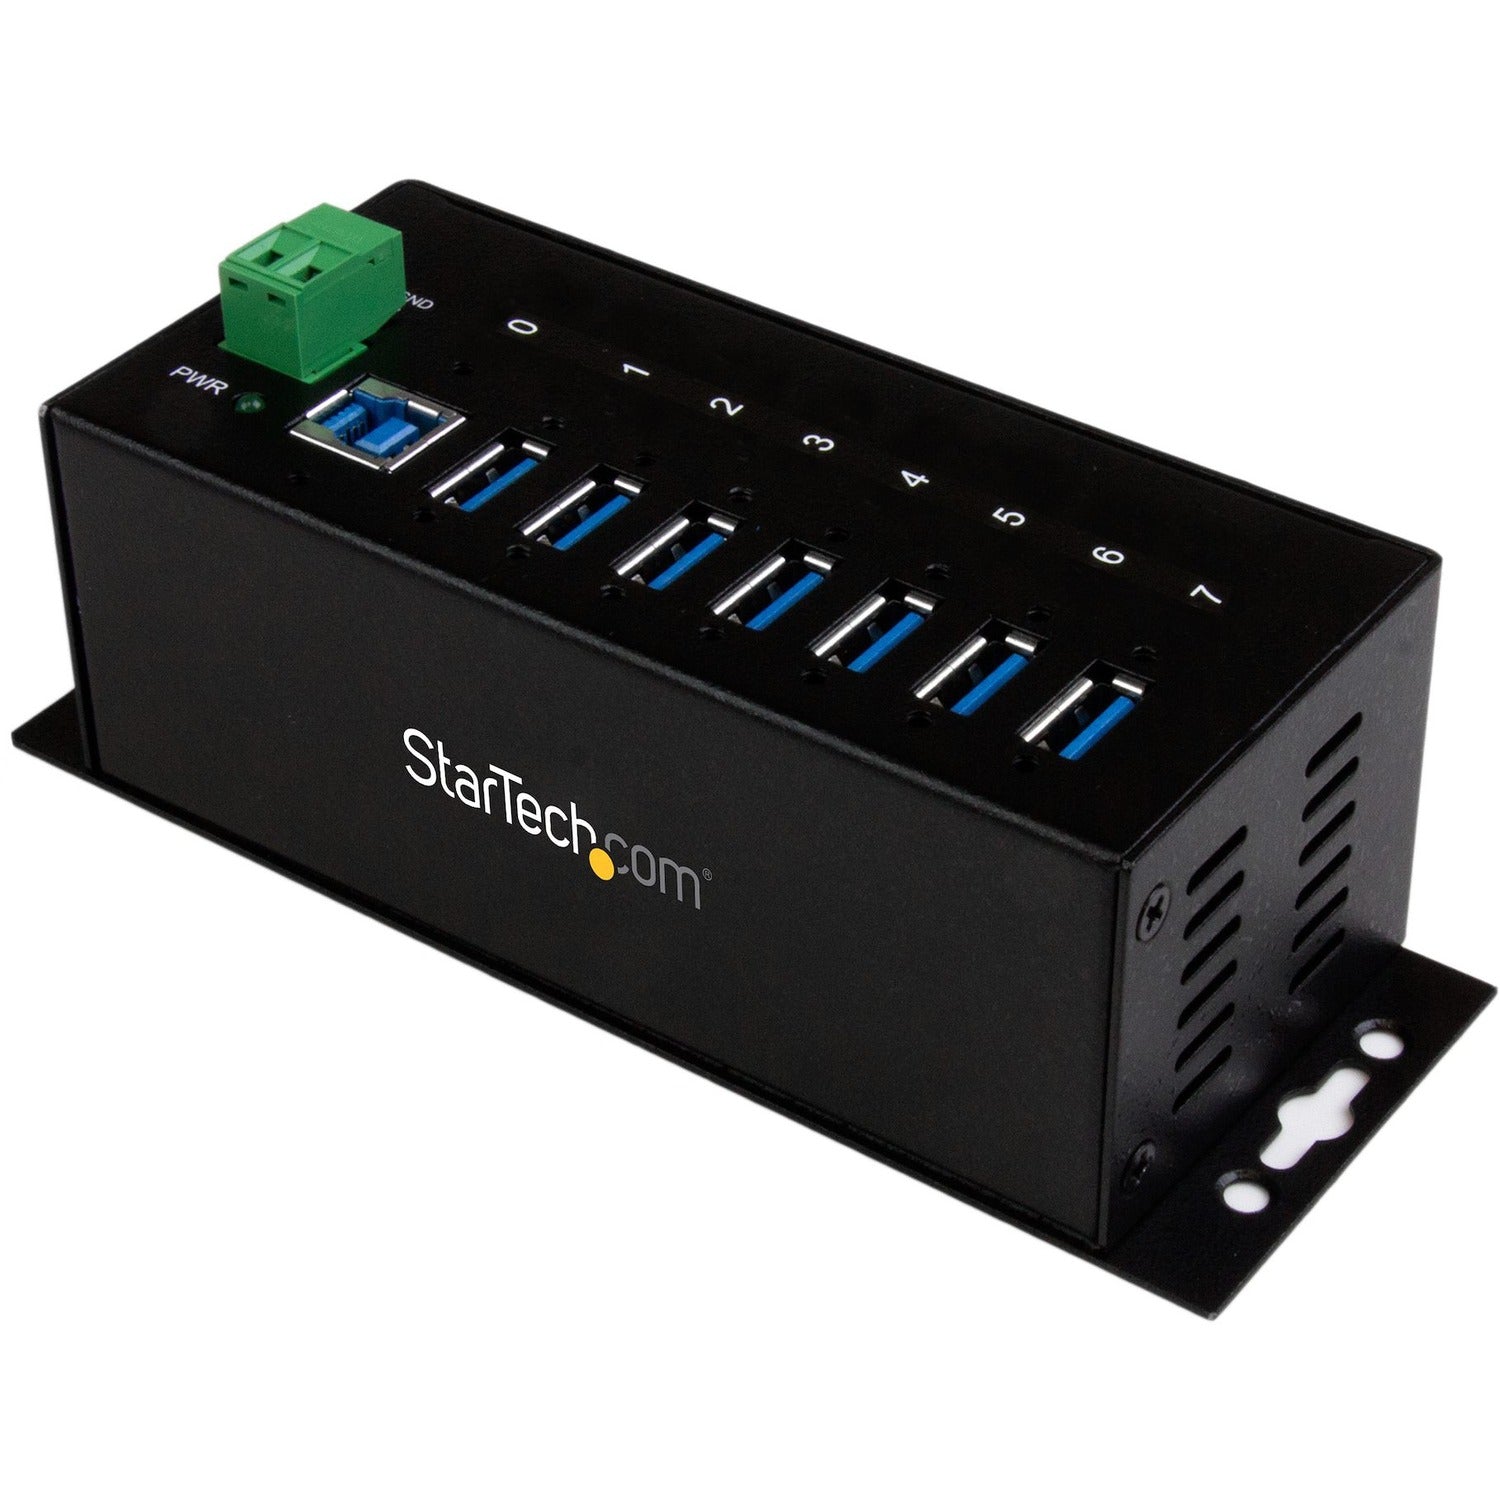 StarTech.com 7 Port Industrial USB 3.0 Hub with ESD - 5Gbps - ST7300USBME